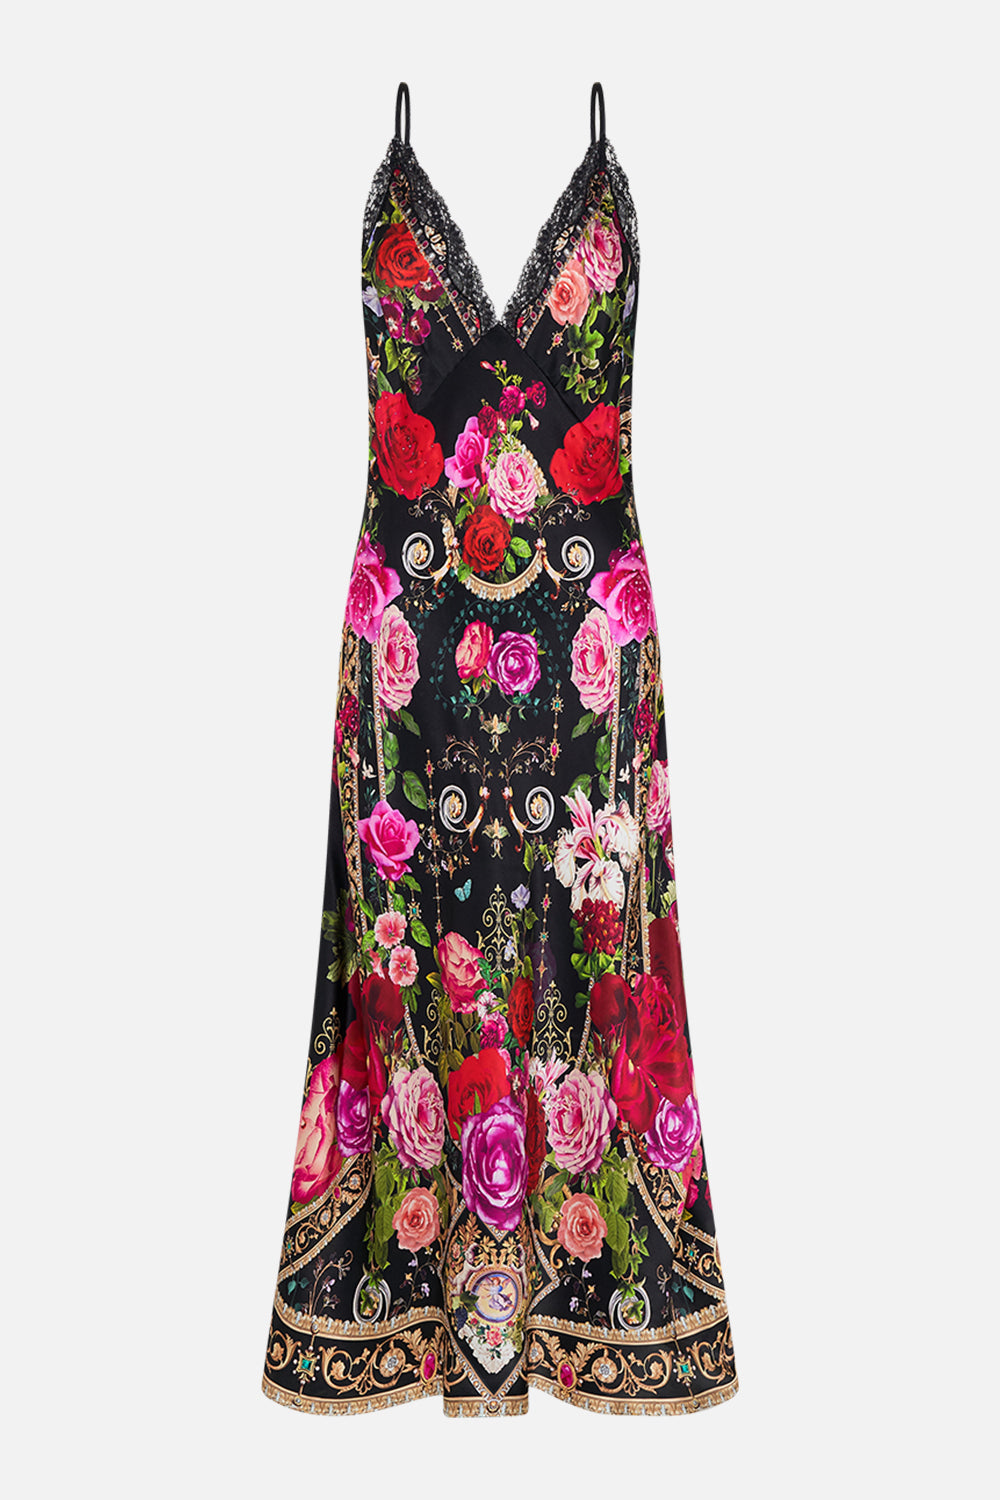 Product view of CAMILLA bias silk slip dress in Reservation for Love print